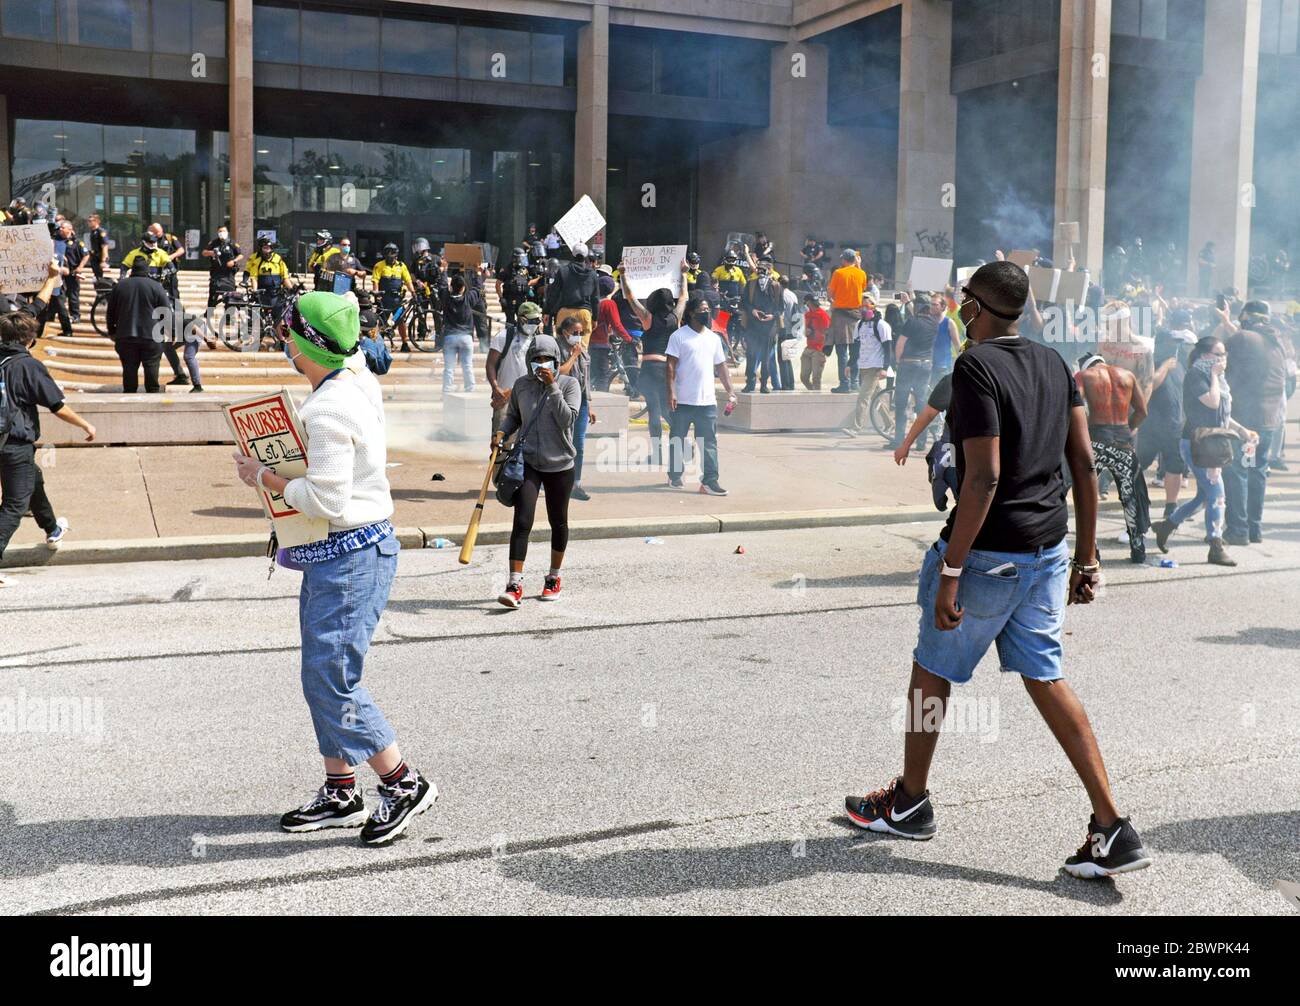 Cleveland, Ohio, USA. 30th May, 2020.  Black Lives Matter protesters are met with tear gas by the Cleveland Police on the steps of the Justice Center in Cleveland, Ohio, USA.  Thousands marched down Lakeside Avenue to protest the killing of blacks by police throughout the country.  The peaceful protest eventually devolved into what the mayor called a 'riot' when police became aggressive resulting in many dispersing and taking to the streets of downtown Cleveland to vandalize and loot.  The downtown area was shut down to outsiders by the mayor for a week thereafter. Stock Photo